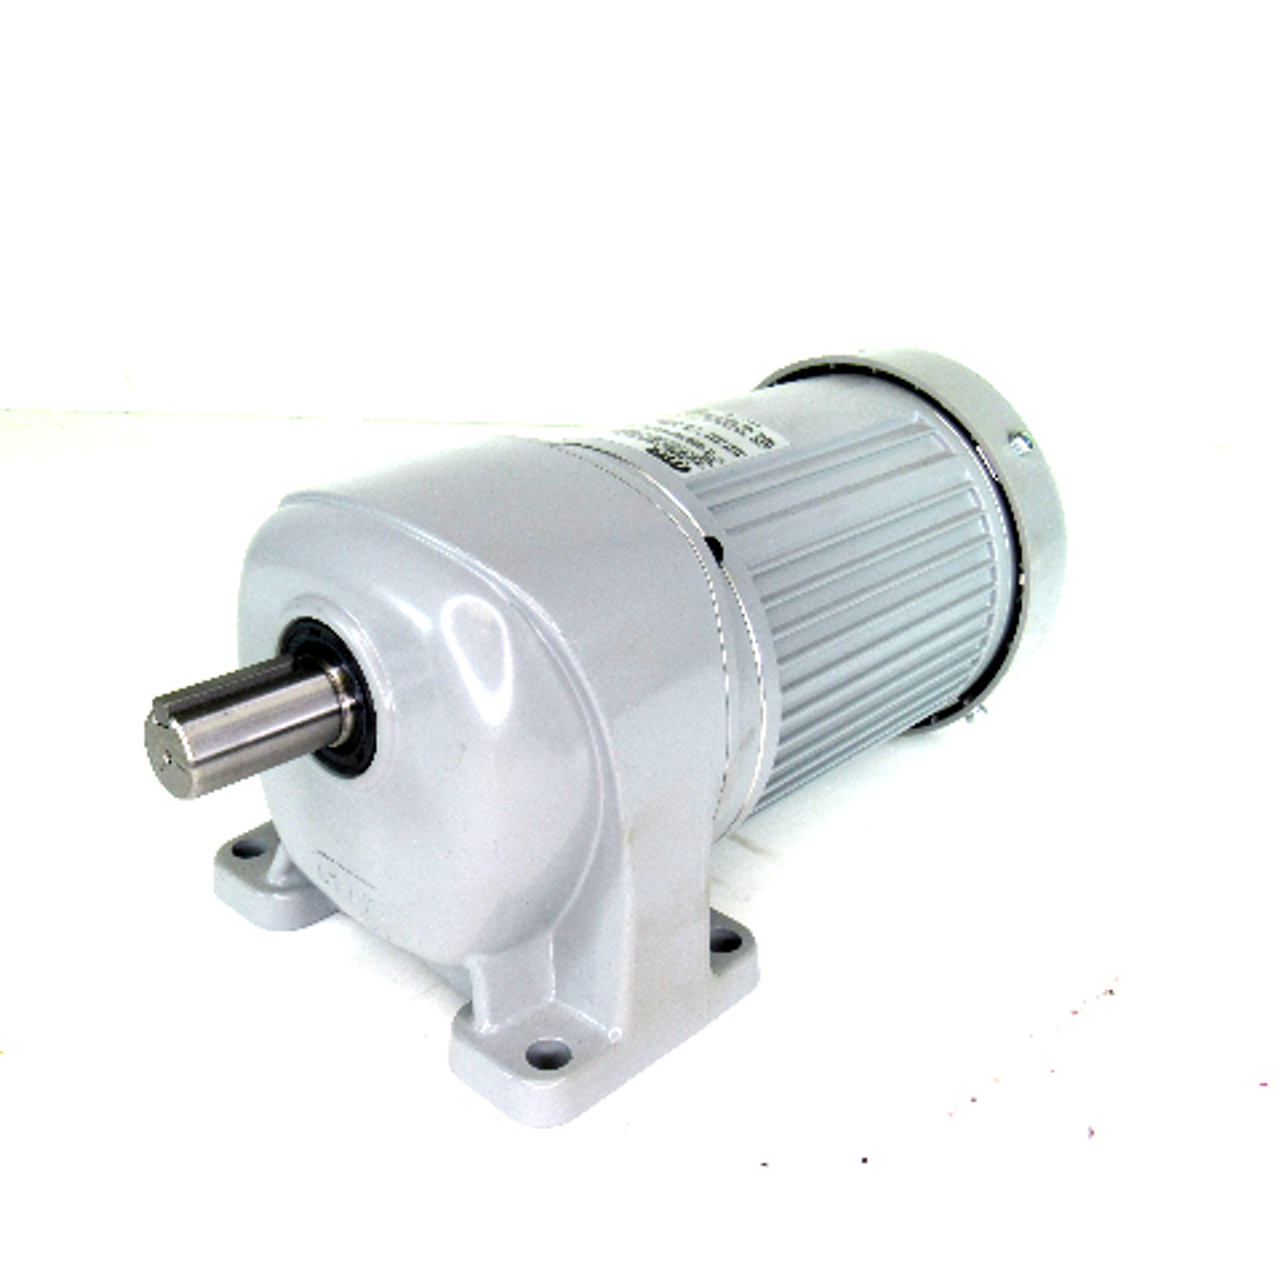 Nissei Corp. GTR G3LM-22-20-T040WX Induction Motor, 3-Phase, 0.4kW, 20:1 Ratio, 415/460V, 50/60Hz, 1.04-0.9 Amp, 1430/1730 RPM